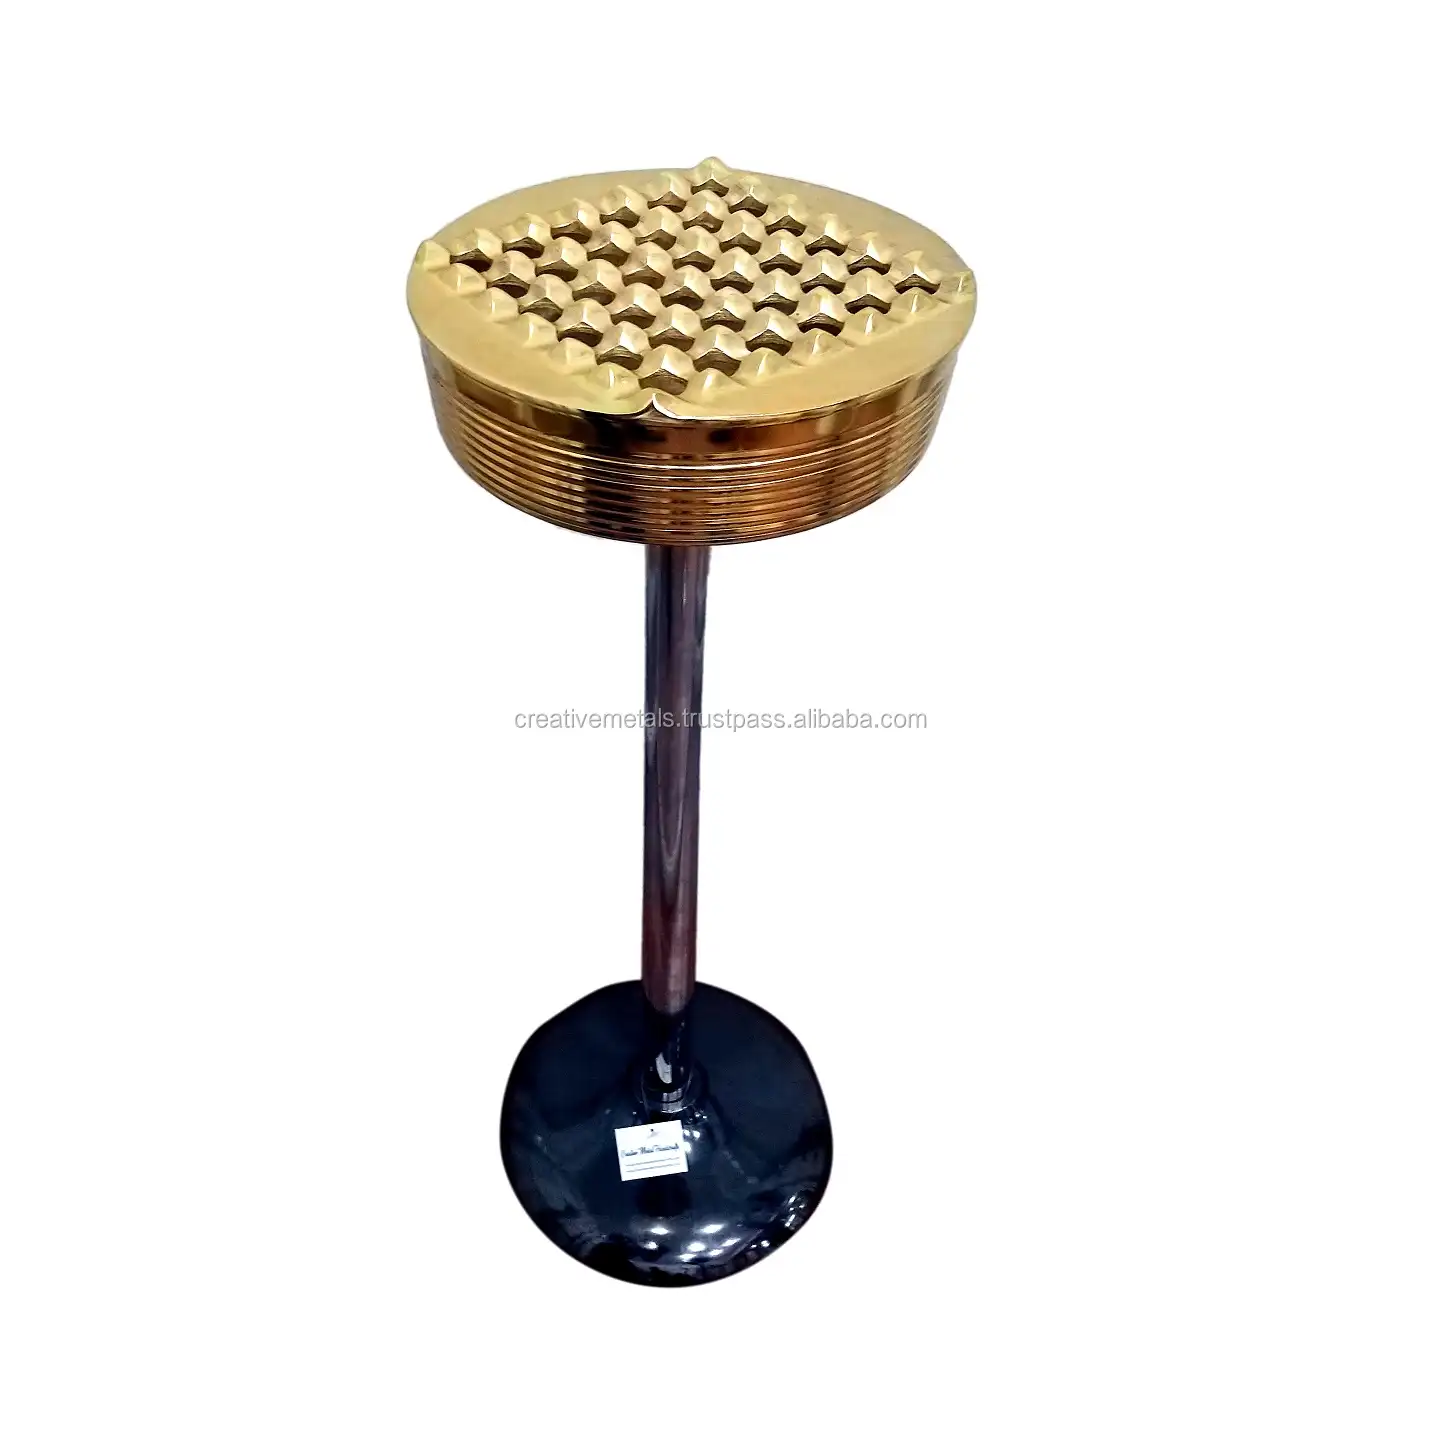 Tabletop Metal Ashtray Stand ash holder stand Antique ash tray for bar Manufacturers & Suppliers of Ashtray